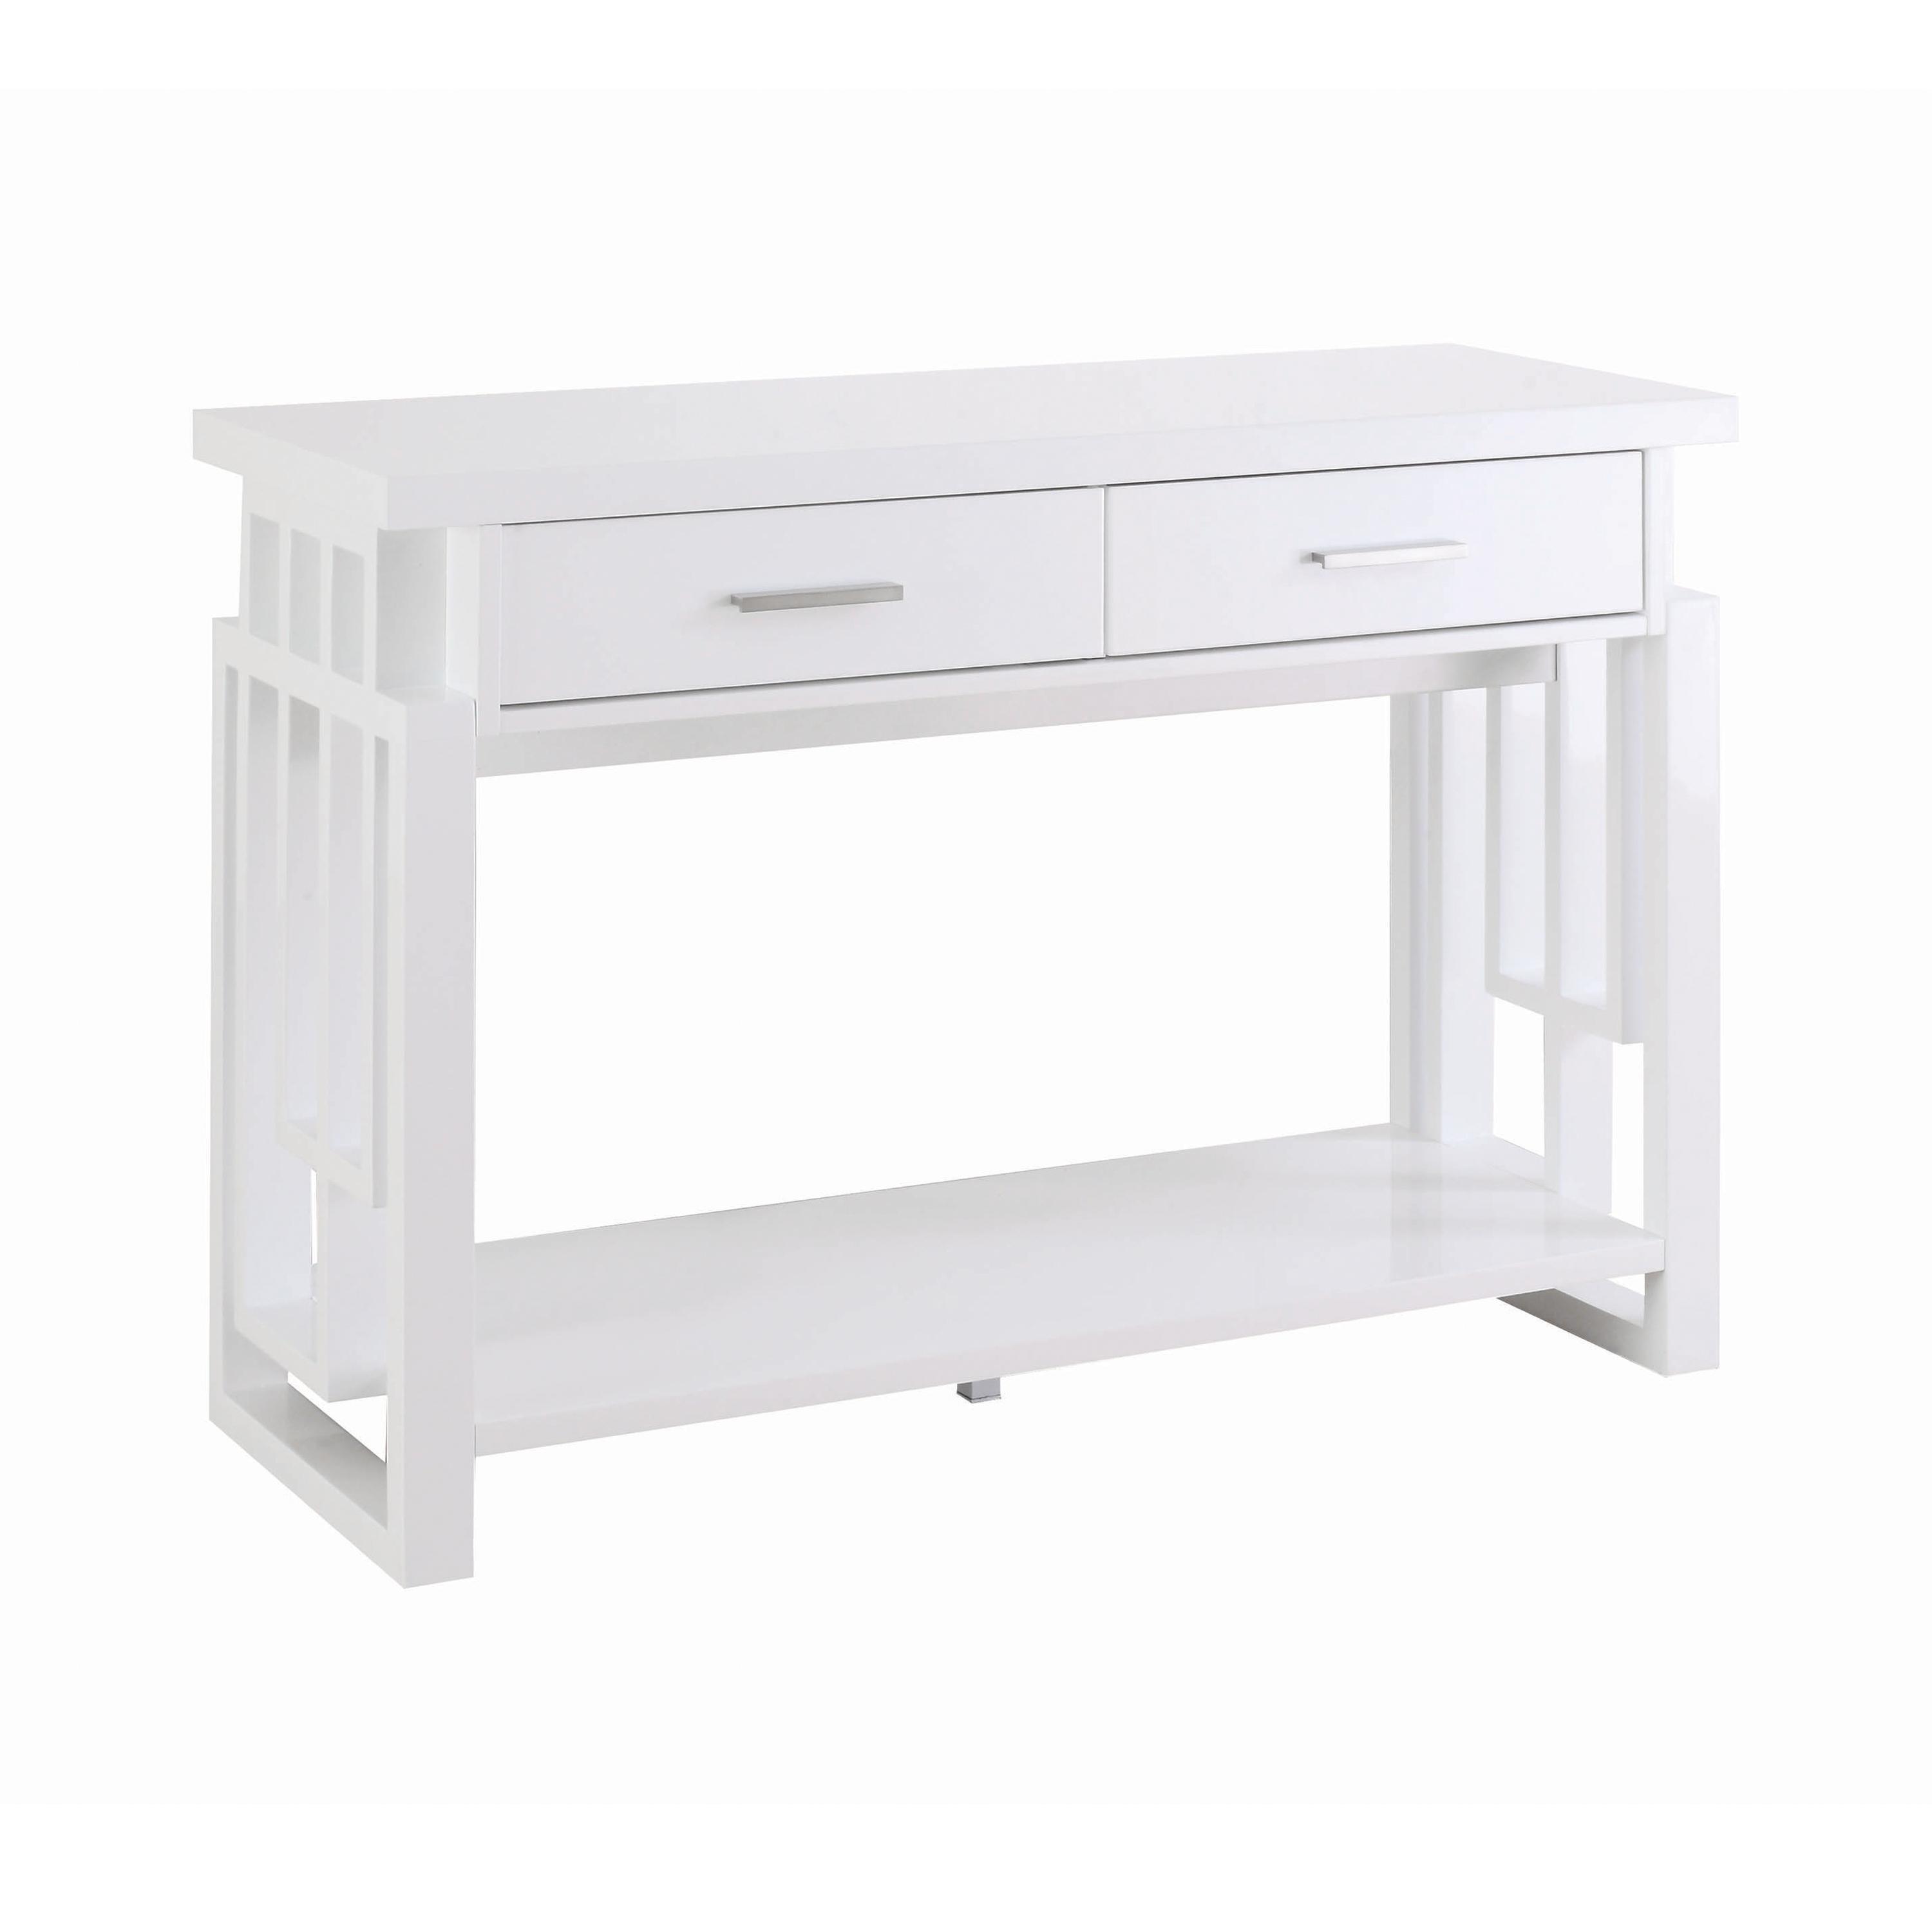 Transitional Sofa Table 705709 705709 in White 